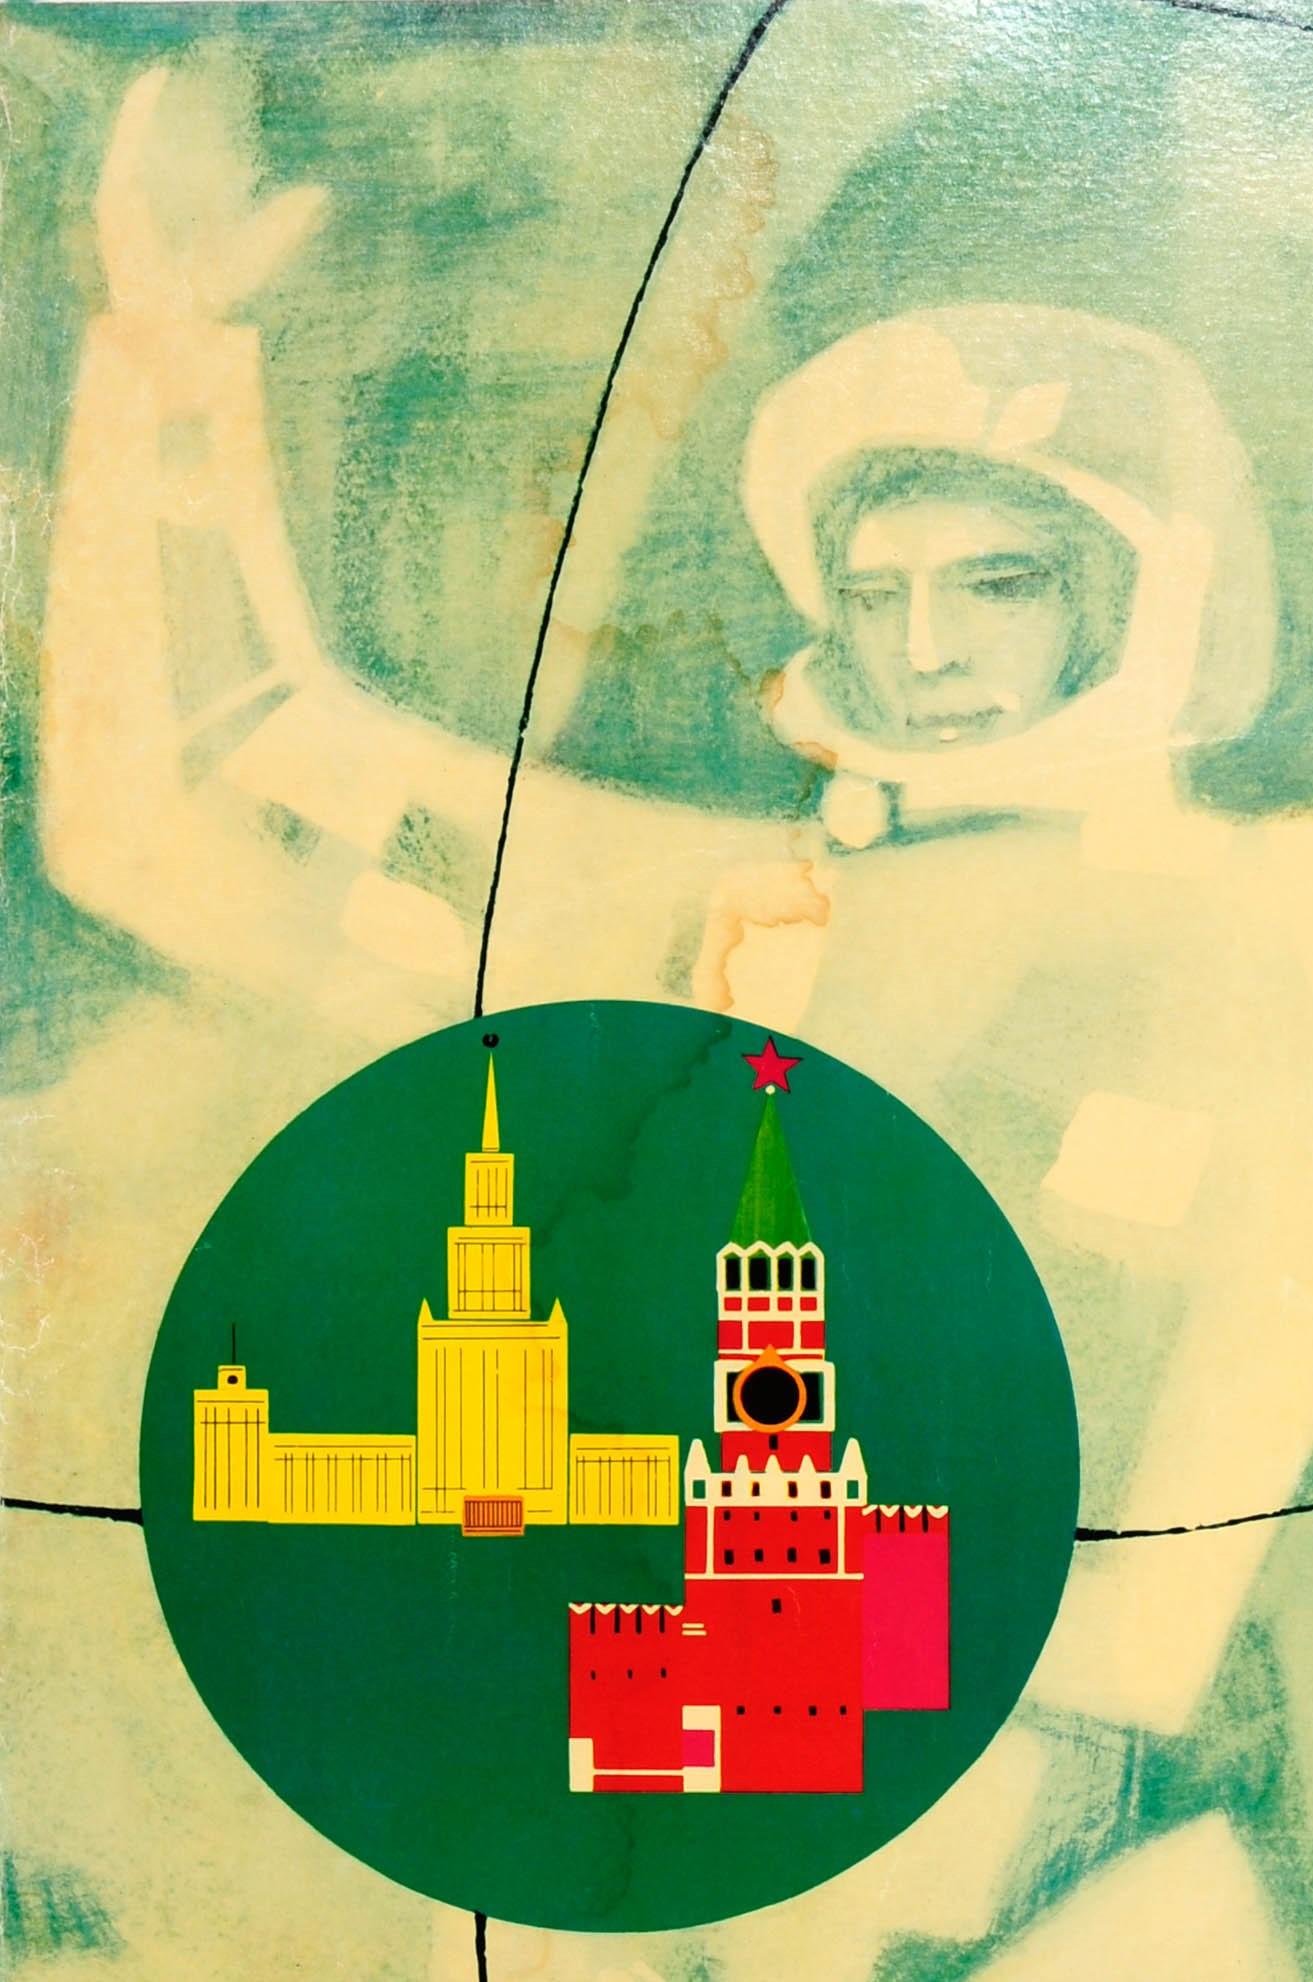 Original vintage travel poster promoting tourism in the Soviet Union featuring a great illustration of a cosmonaut / astronaut in a space suit with a red star above and a skyscraper and the Moscow Kremlin inside a dark green circle and the Intourist